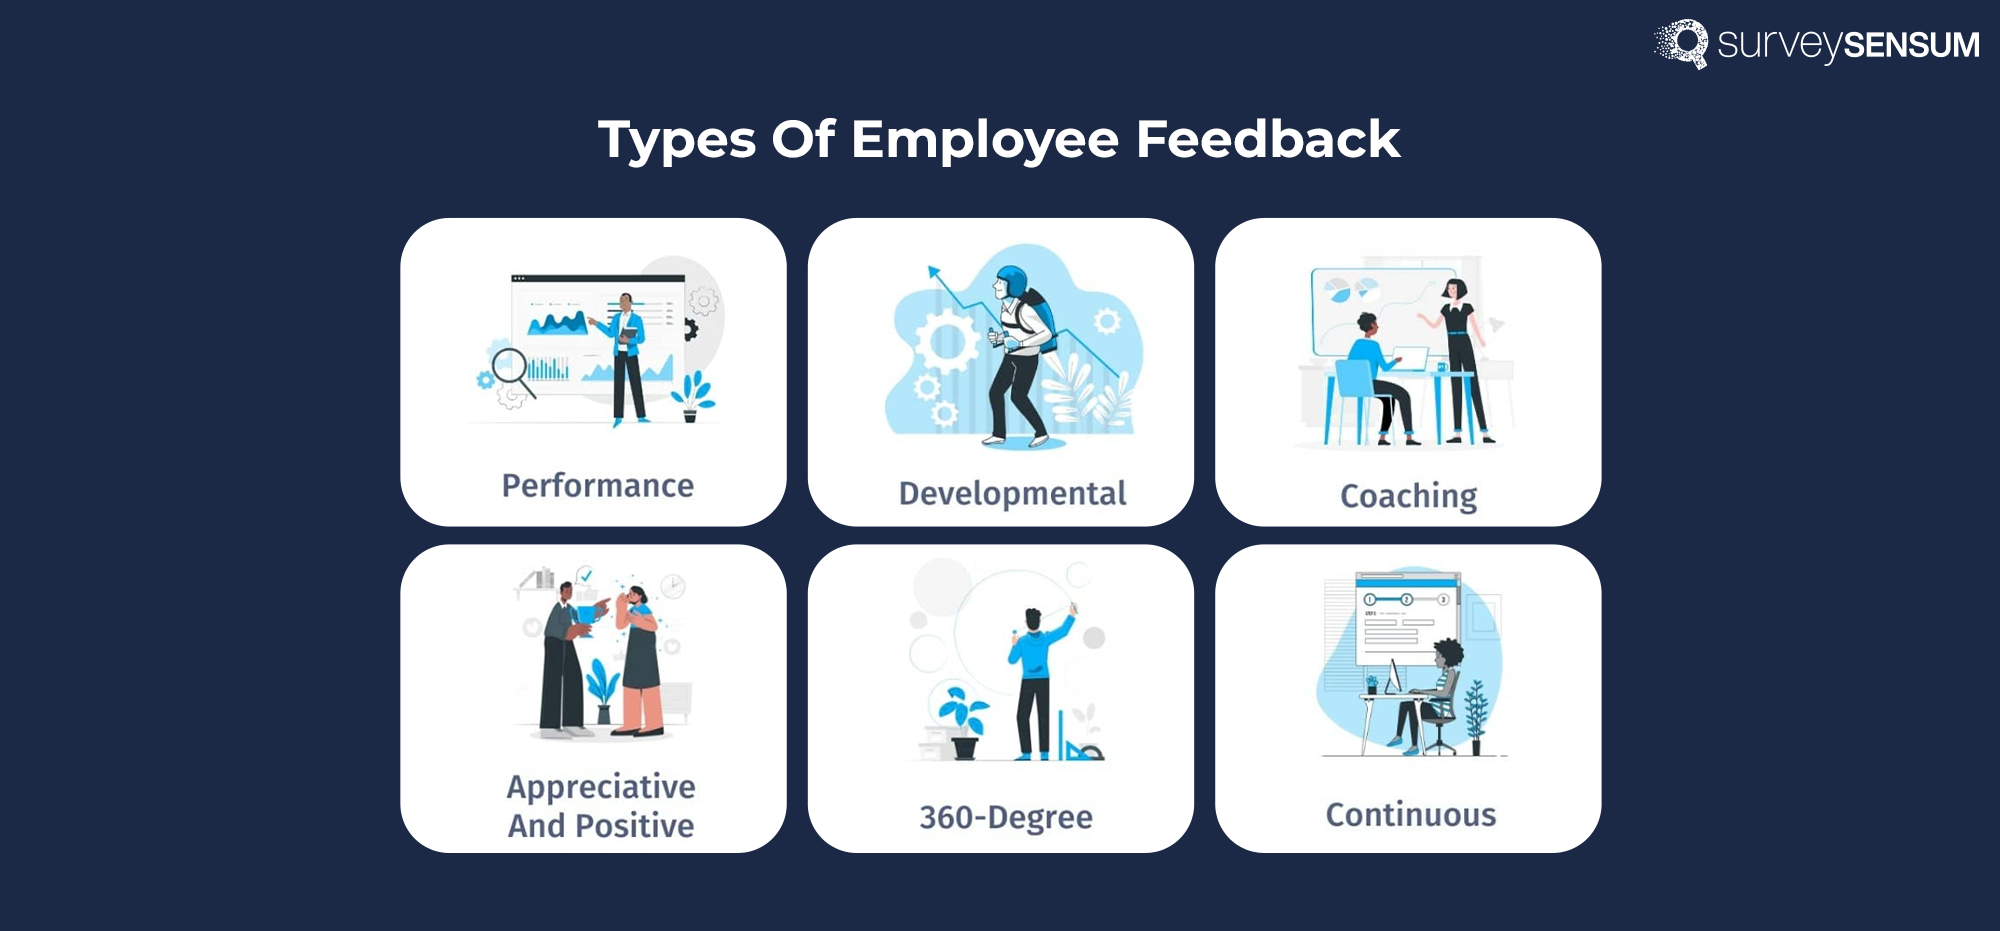  the image shows the different types of employee feedback like performance, development, coaching, appreciative and positive, 360-degree and continuous, etc. 